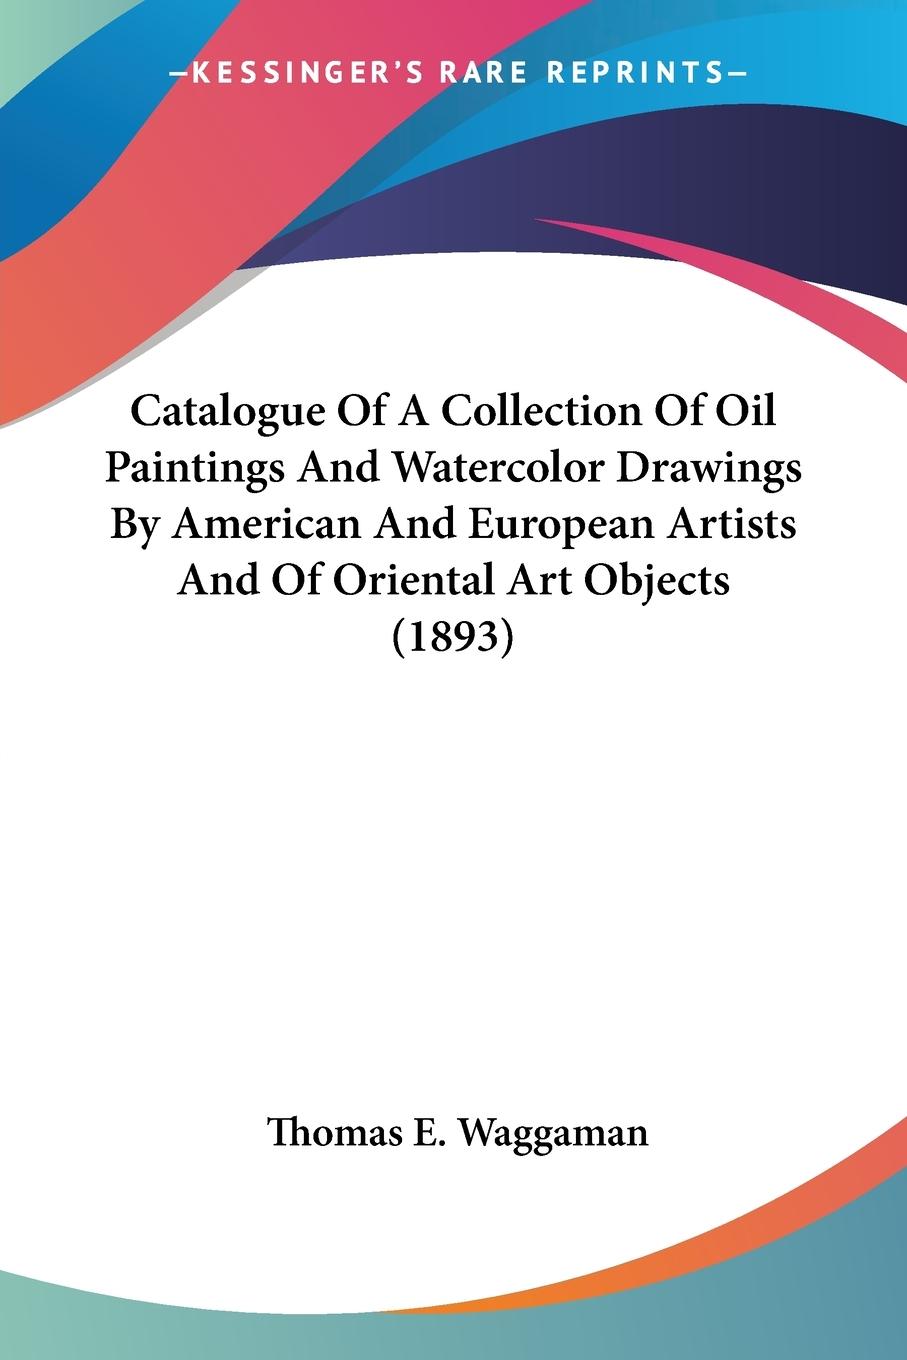 Catalogue Of A Collection Of Oil Paintings And Watercolor Drawings By American And European Artists And Of Oriental Art Objects (1893) - Waggaman, Thomas E.